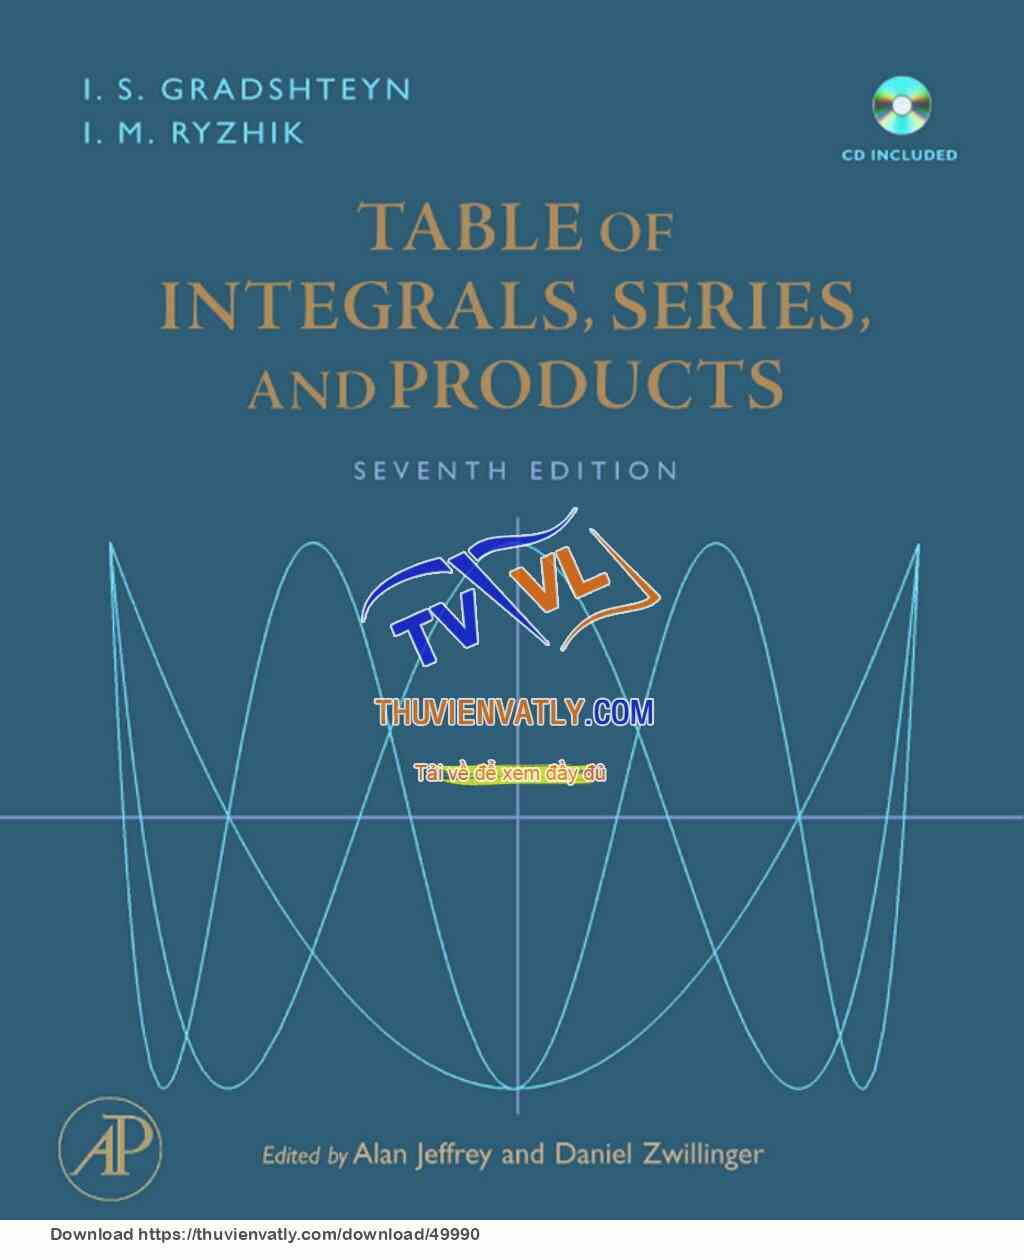 Table of integrals series and products